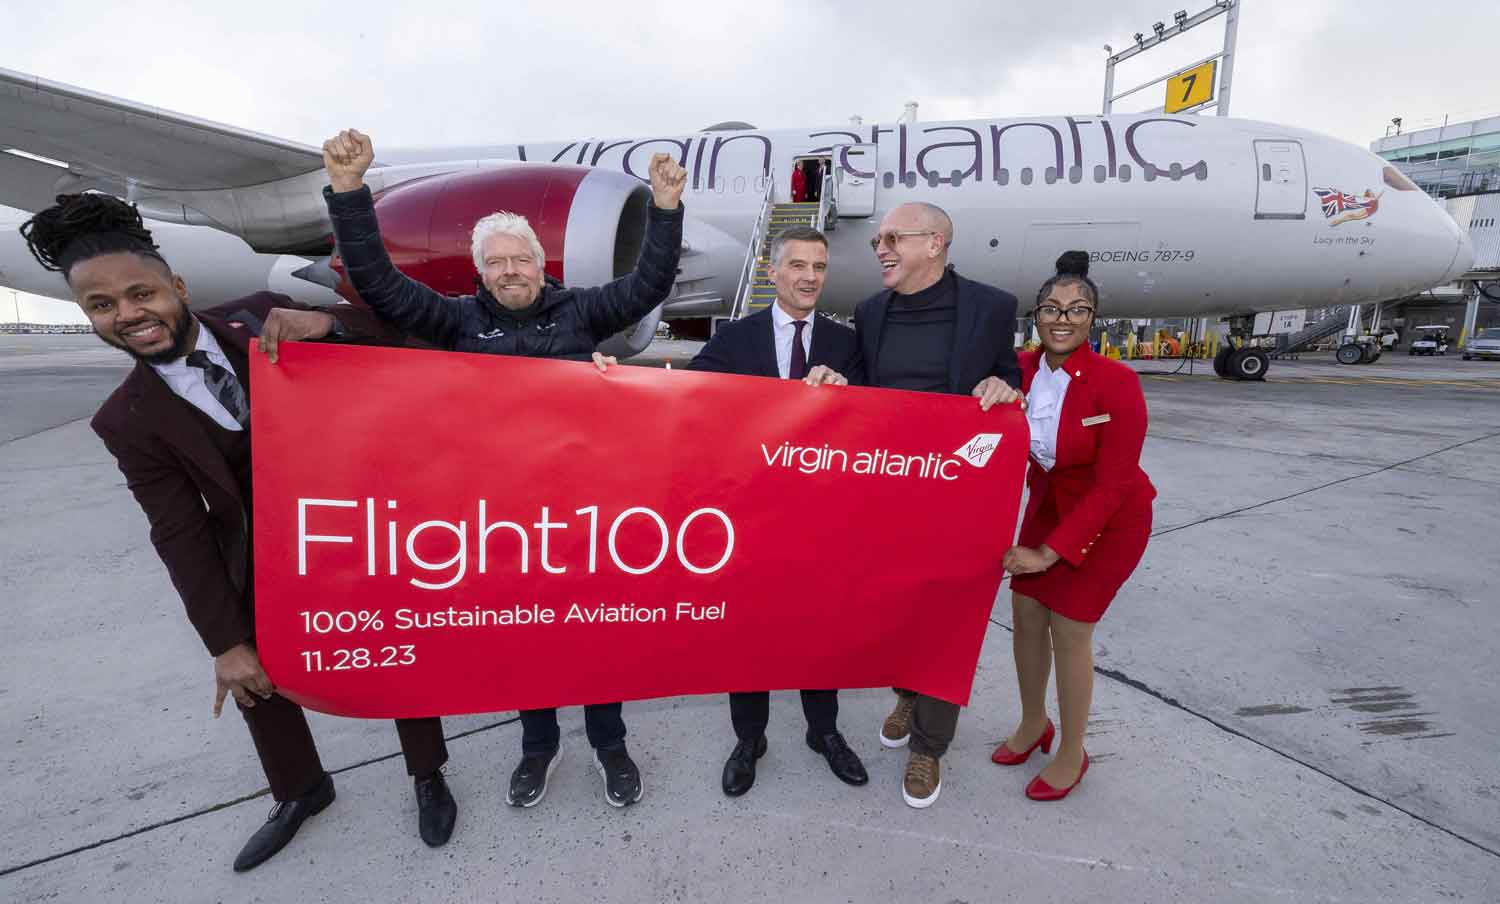 Richard Branson, three other men, and one woman pose in front of a plane holding a banner that says Flight100.